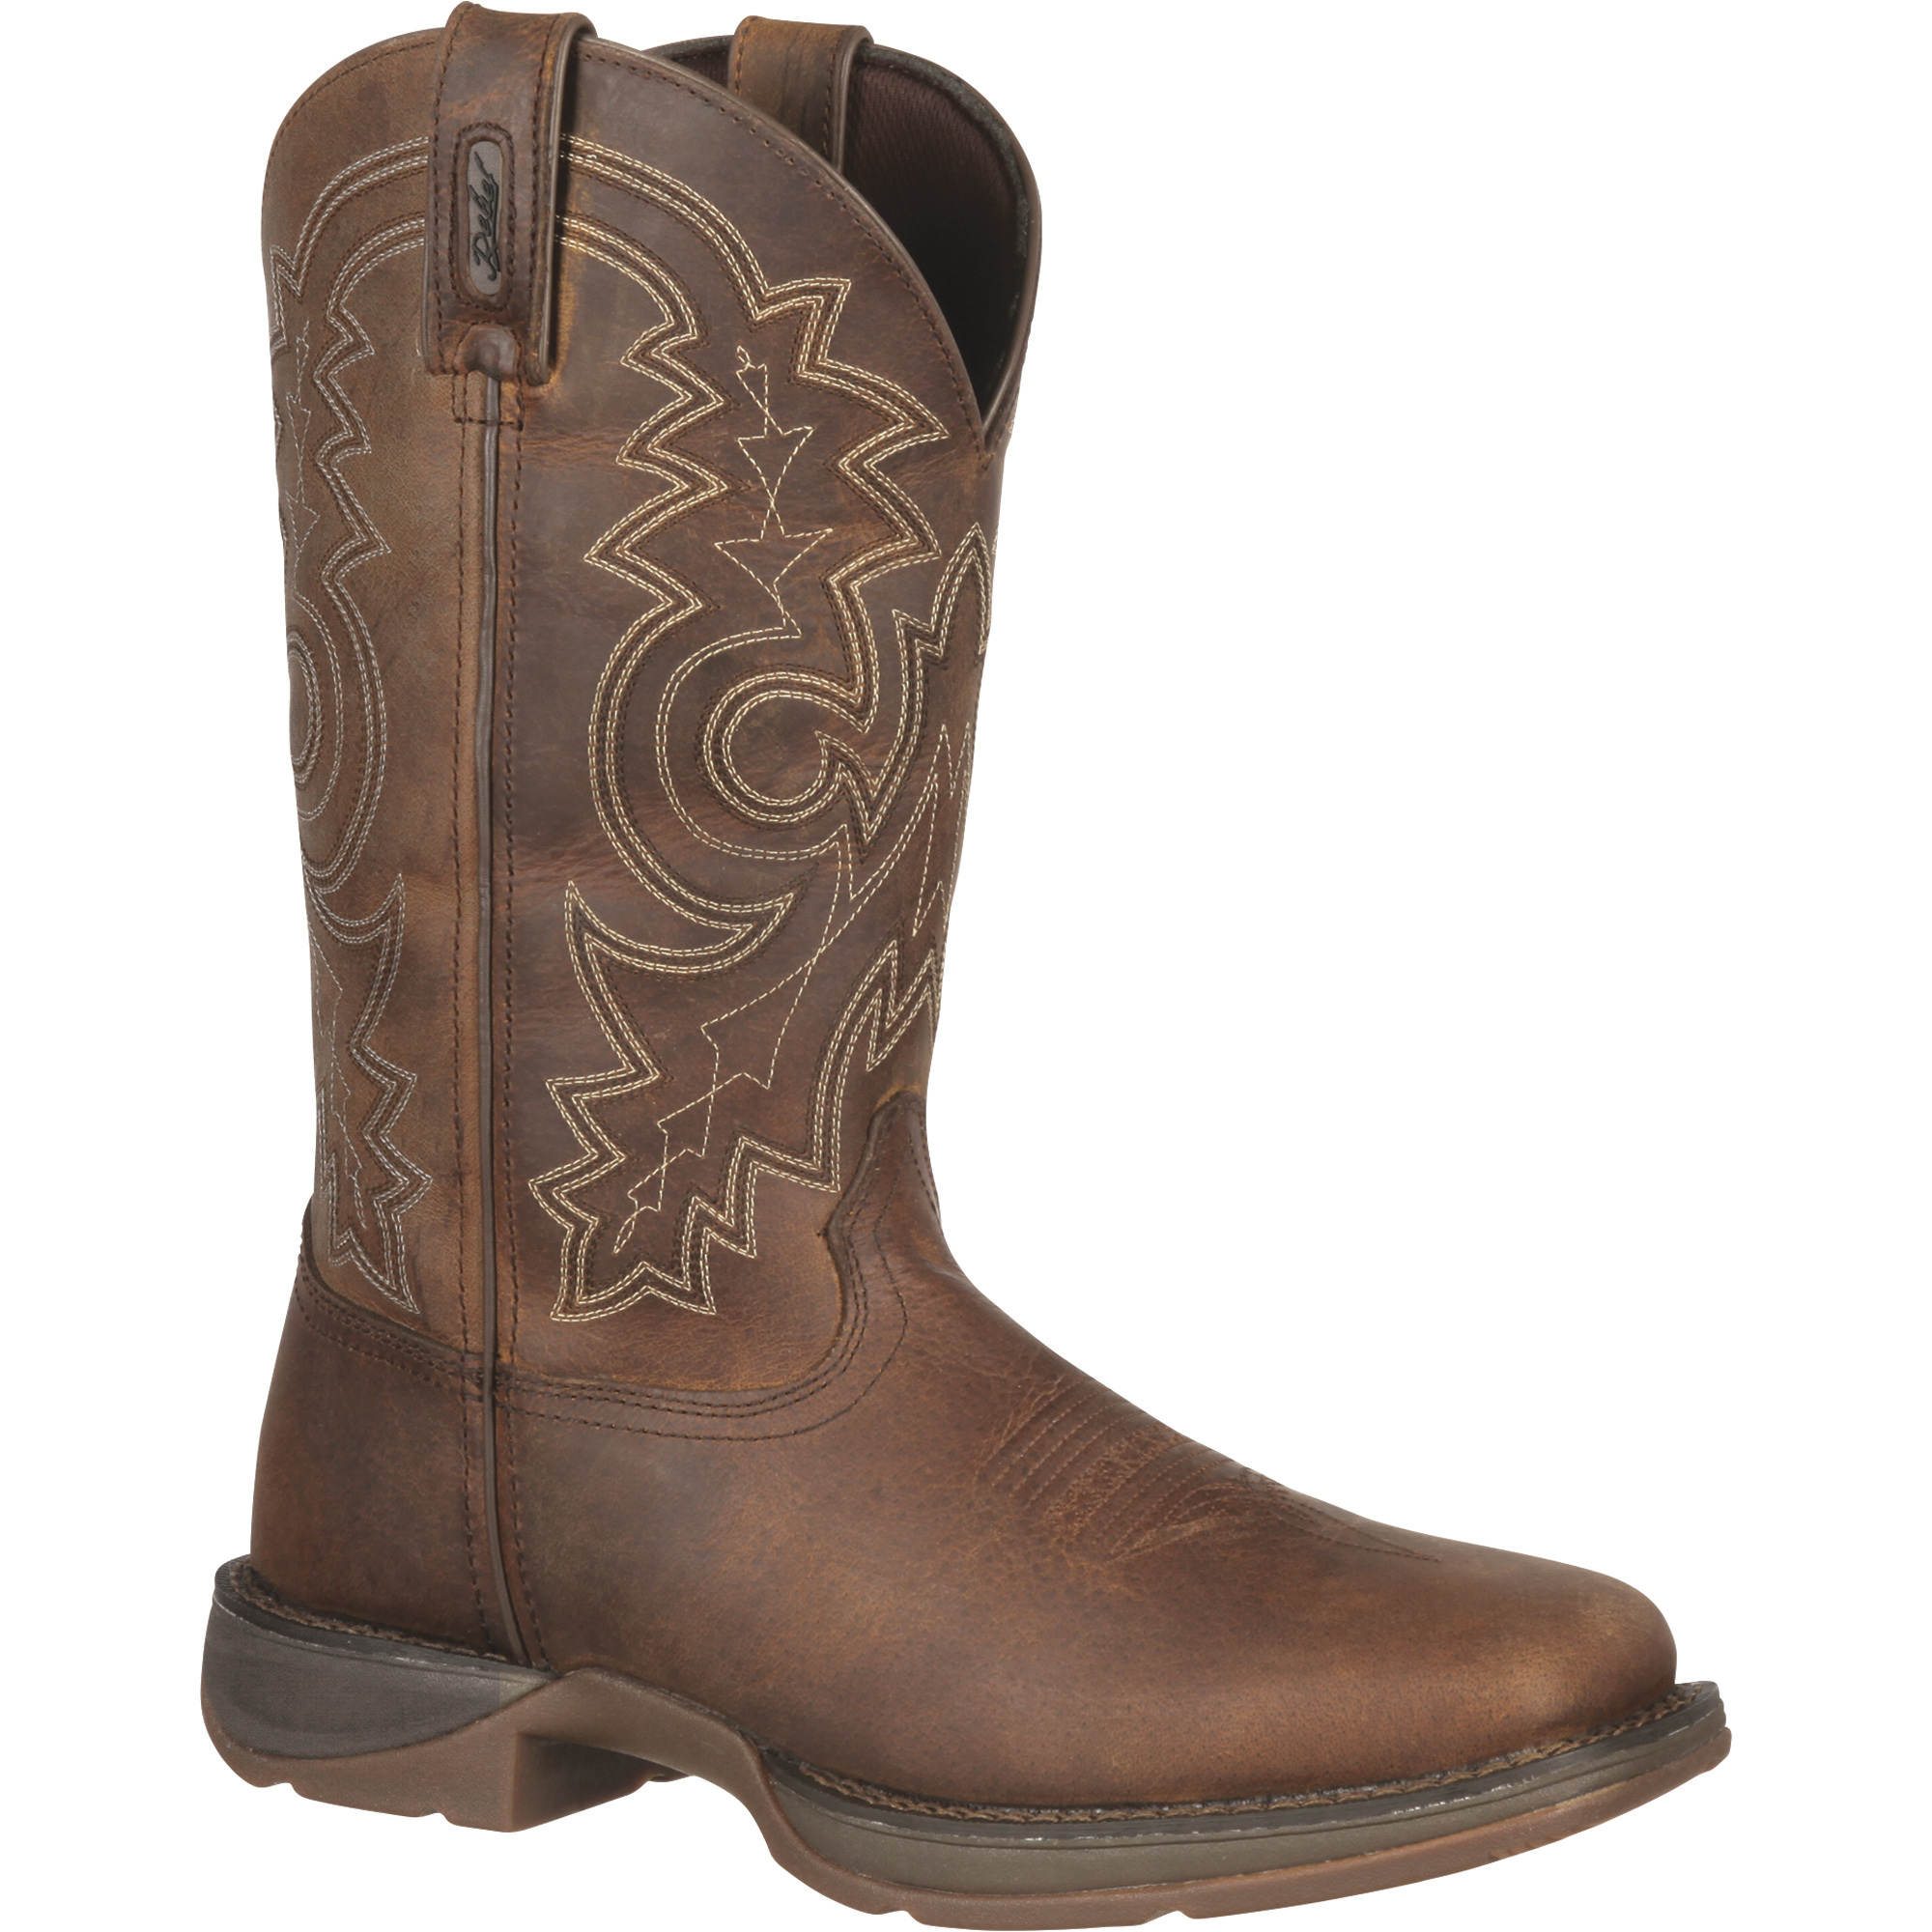 Durango Rebel 11Inch Square-Toe Western Boots - Brown, Size 10, Model DB4443